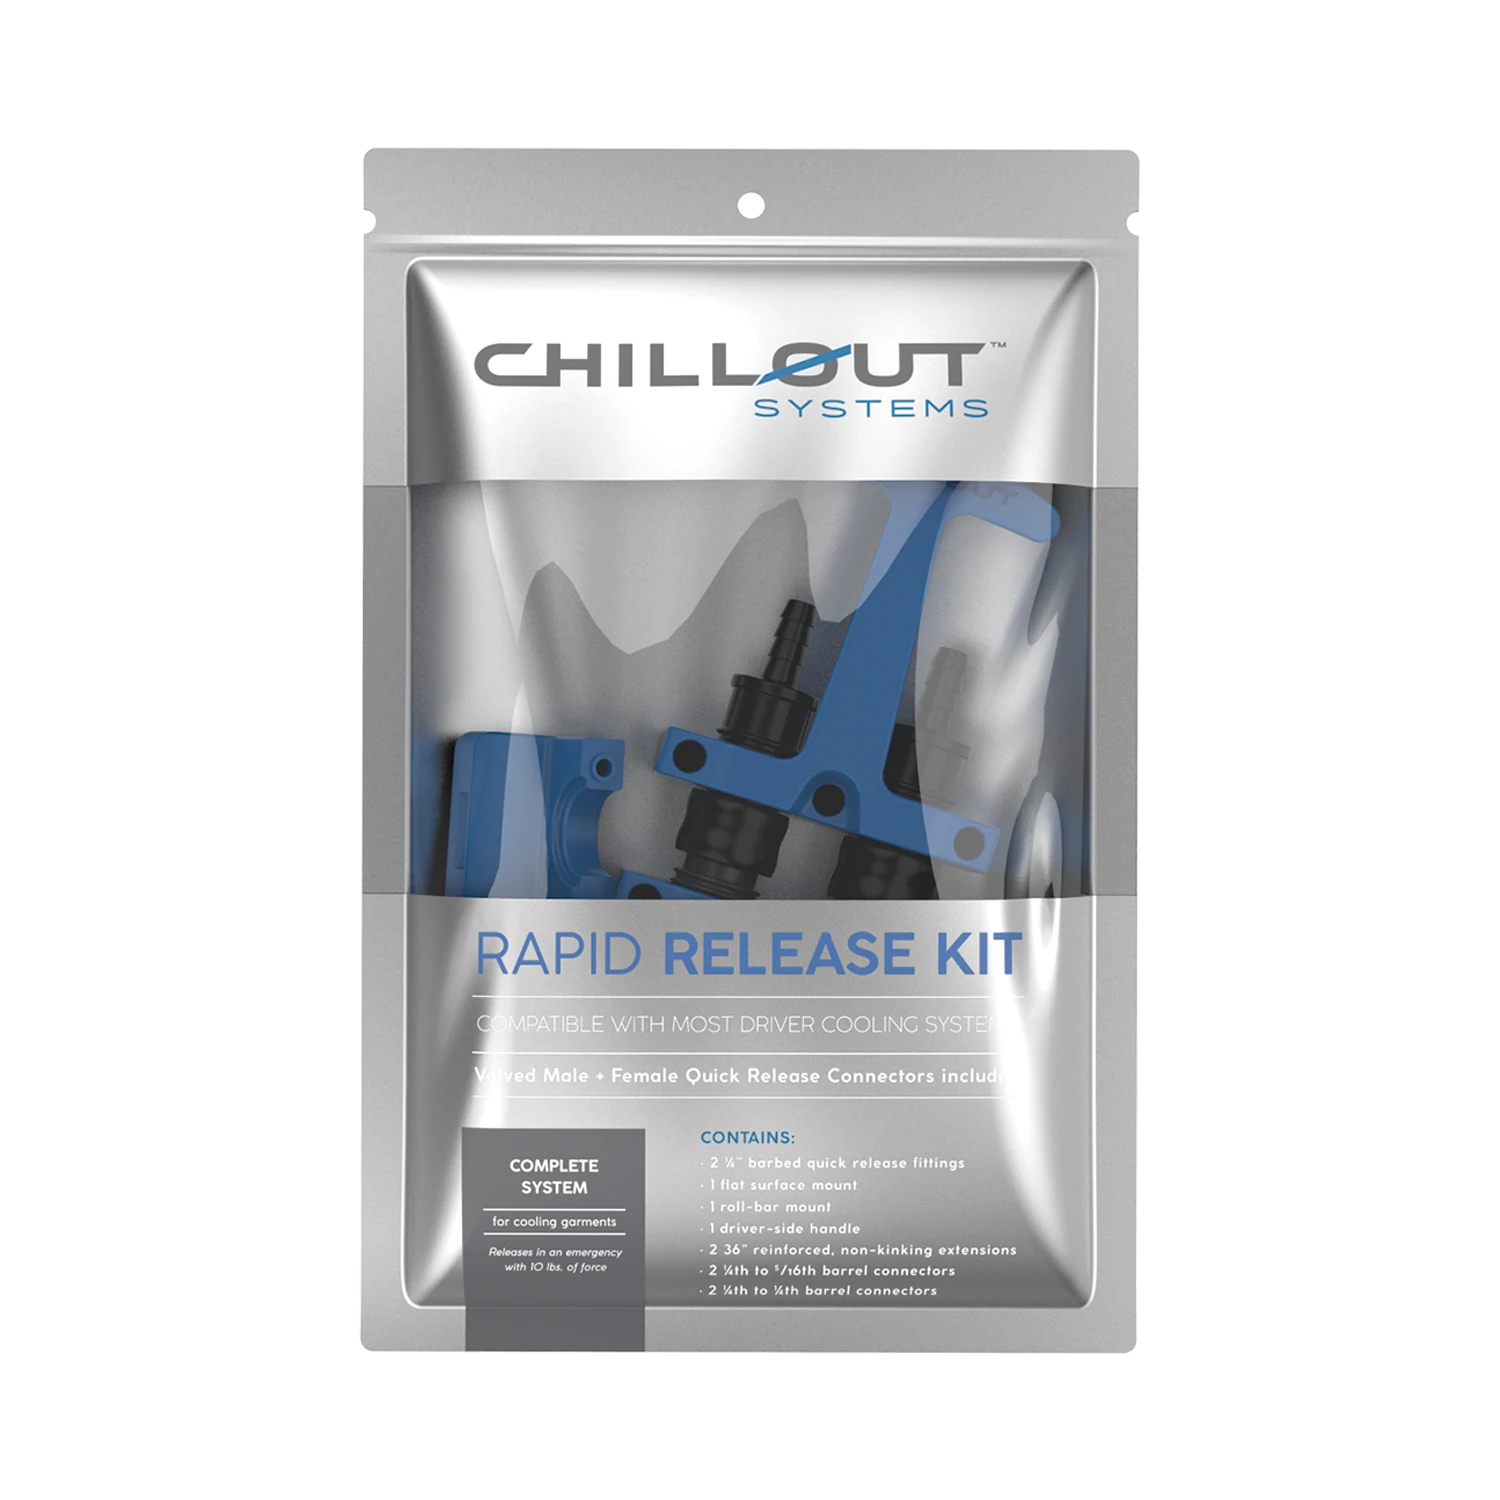 ChillOut Rapid Release Kit